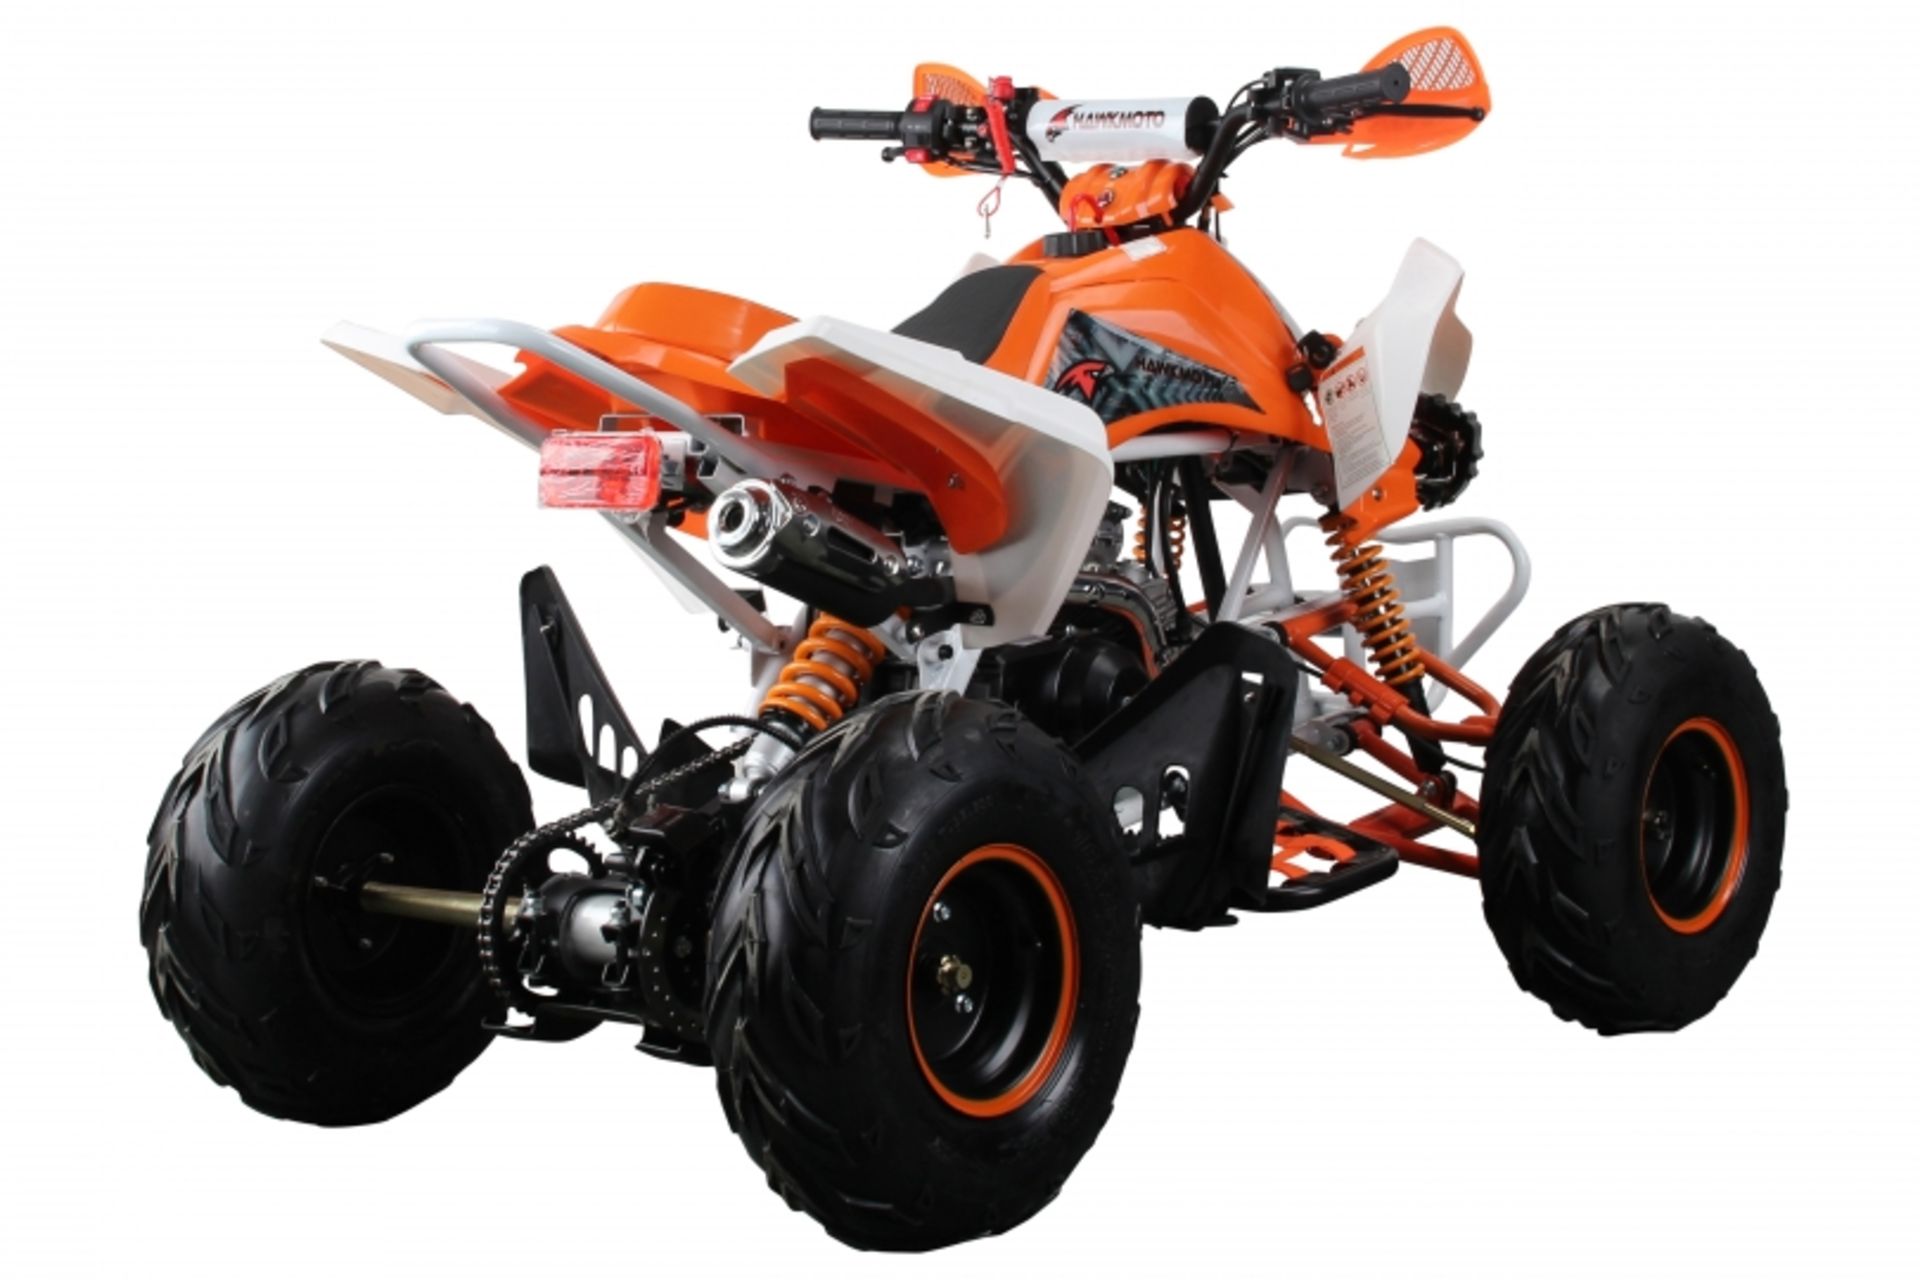 V Brand New 125cc Interceptor SV2 4 Stroke Quad Bike With Reverse Gear - Double Front Suspension/ - Image 4 of 7